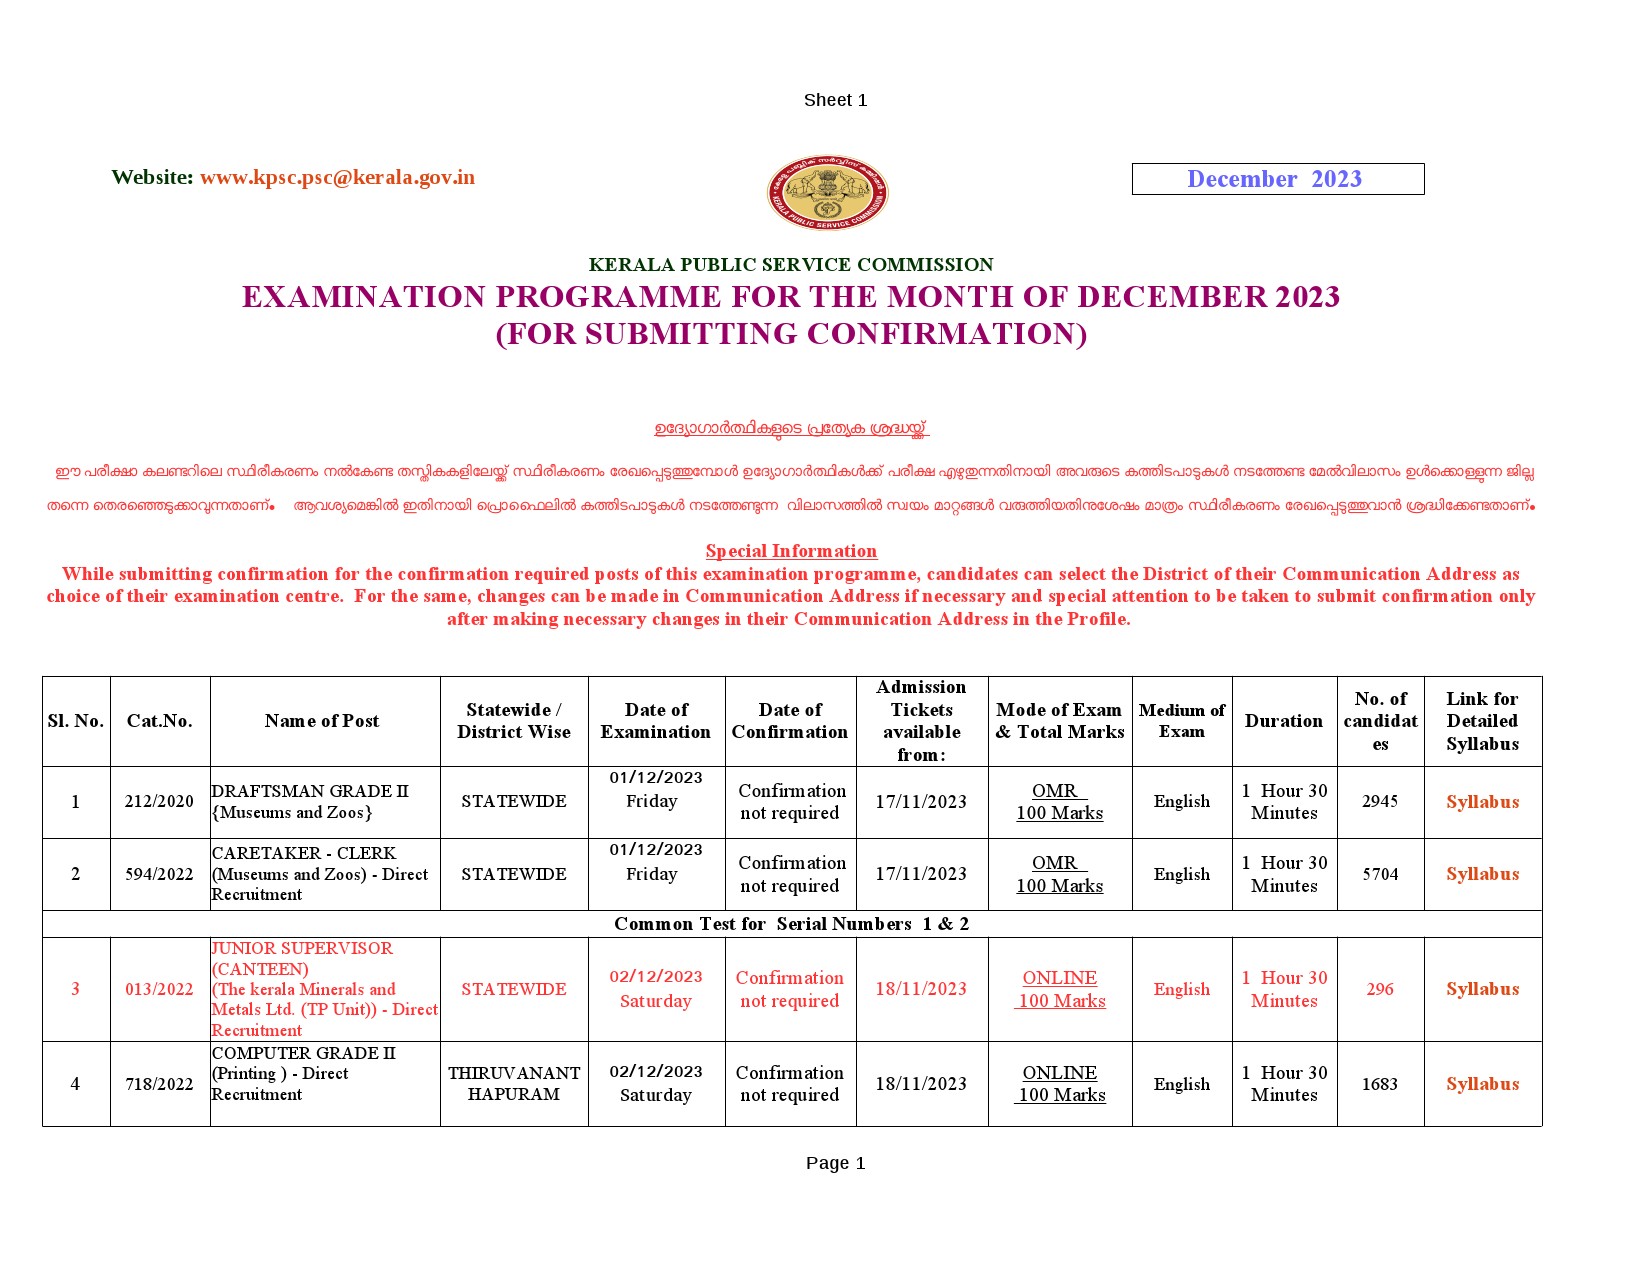 EXAMINATION PROGRAMME FOR THE MONTH OF DECEMBER 2023 - Notification Image 1